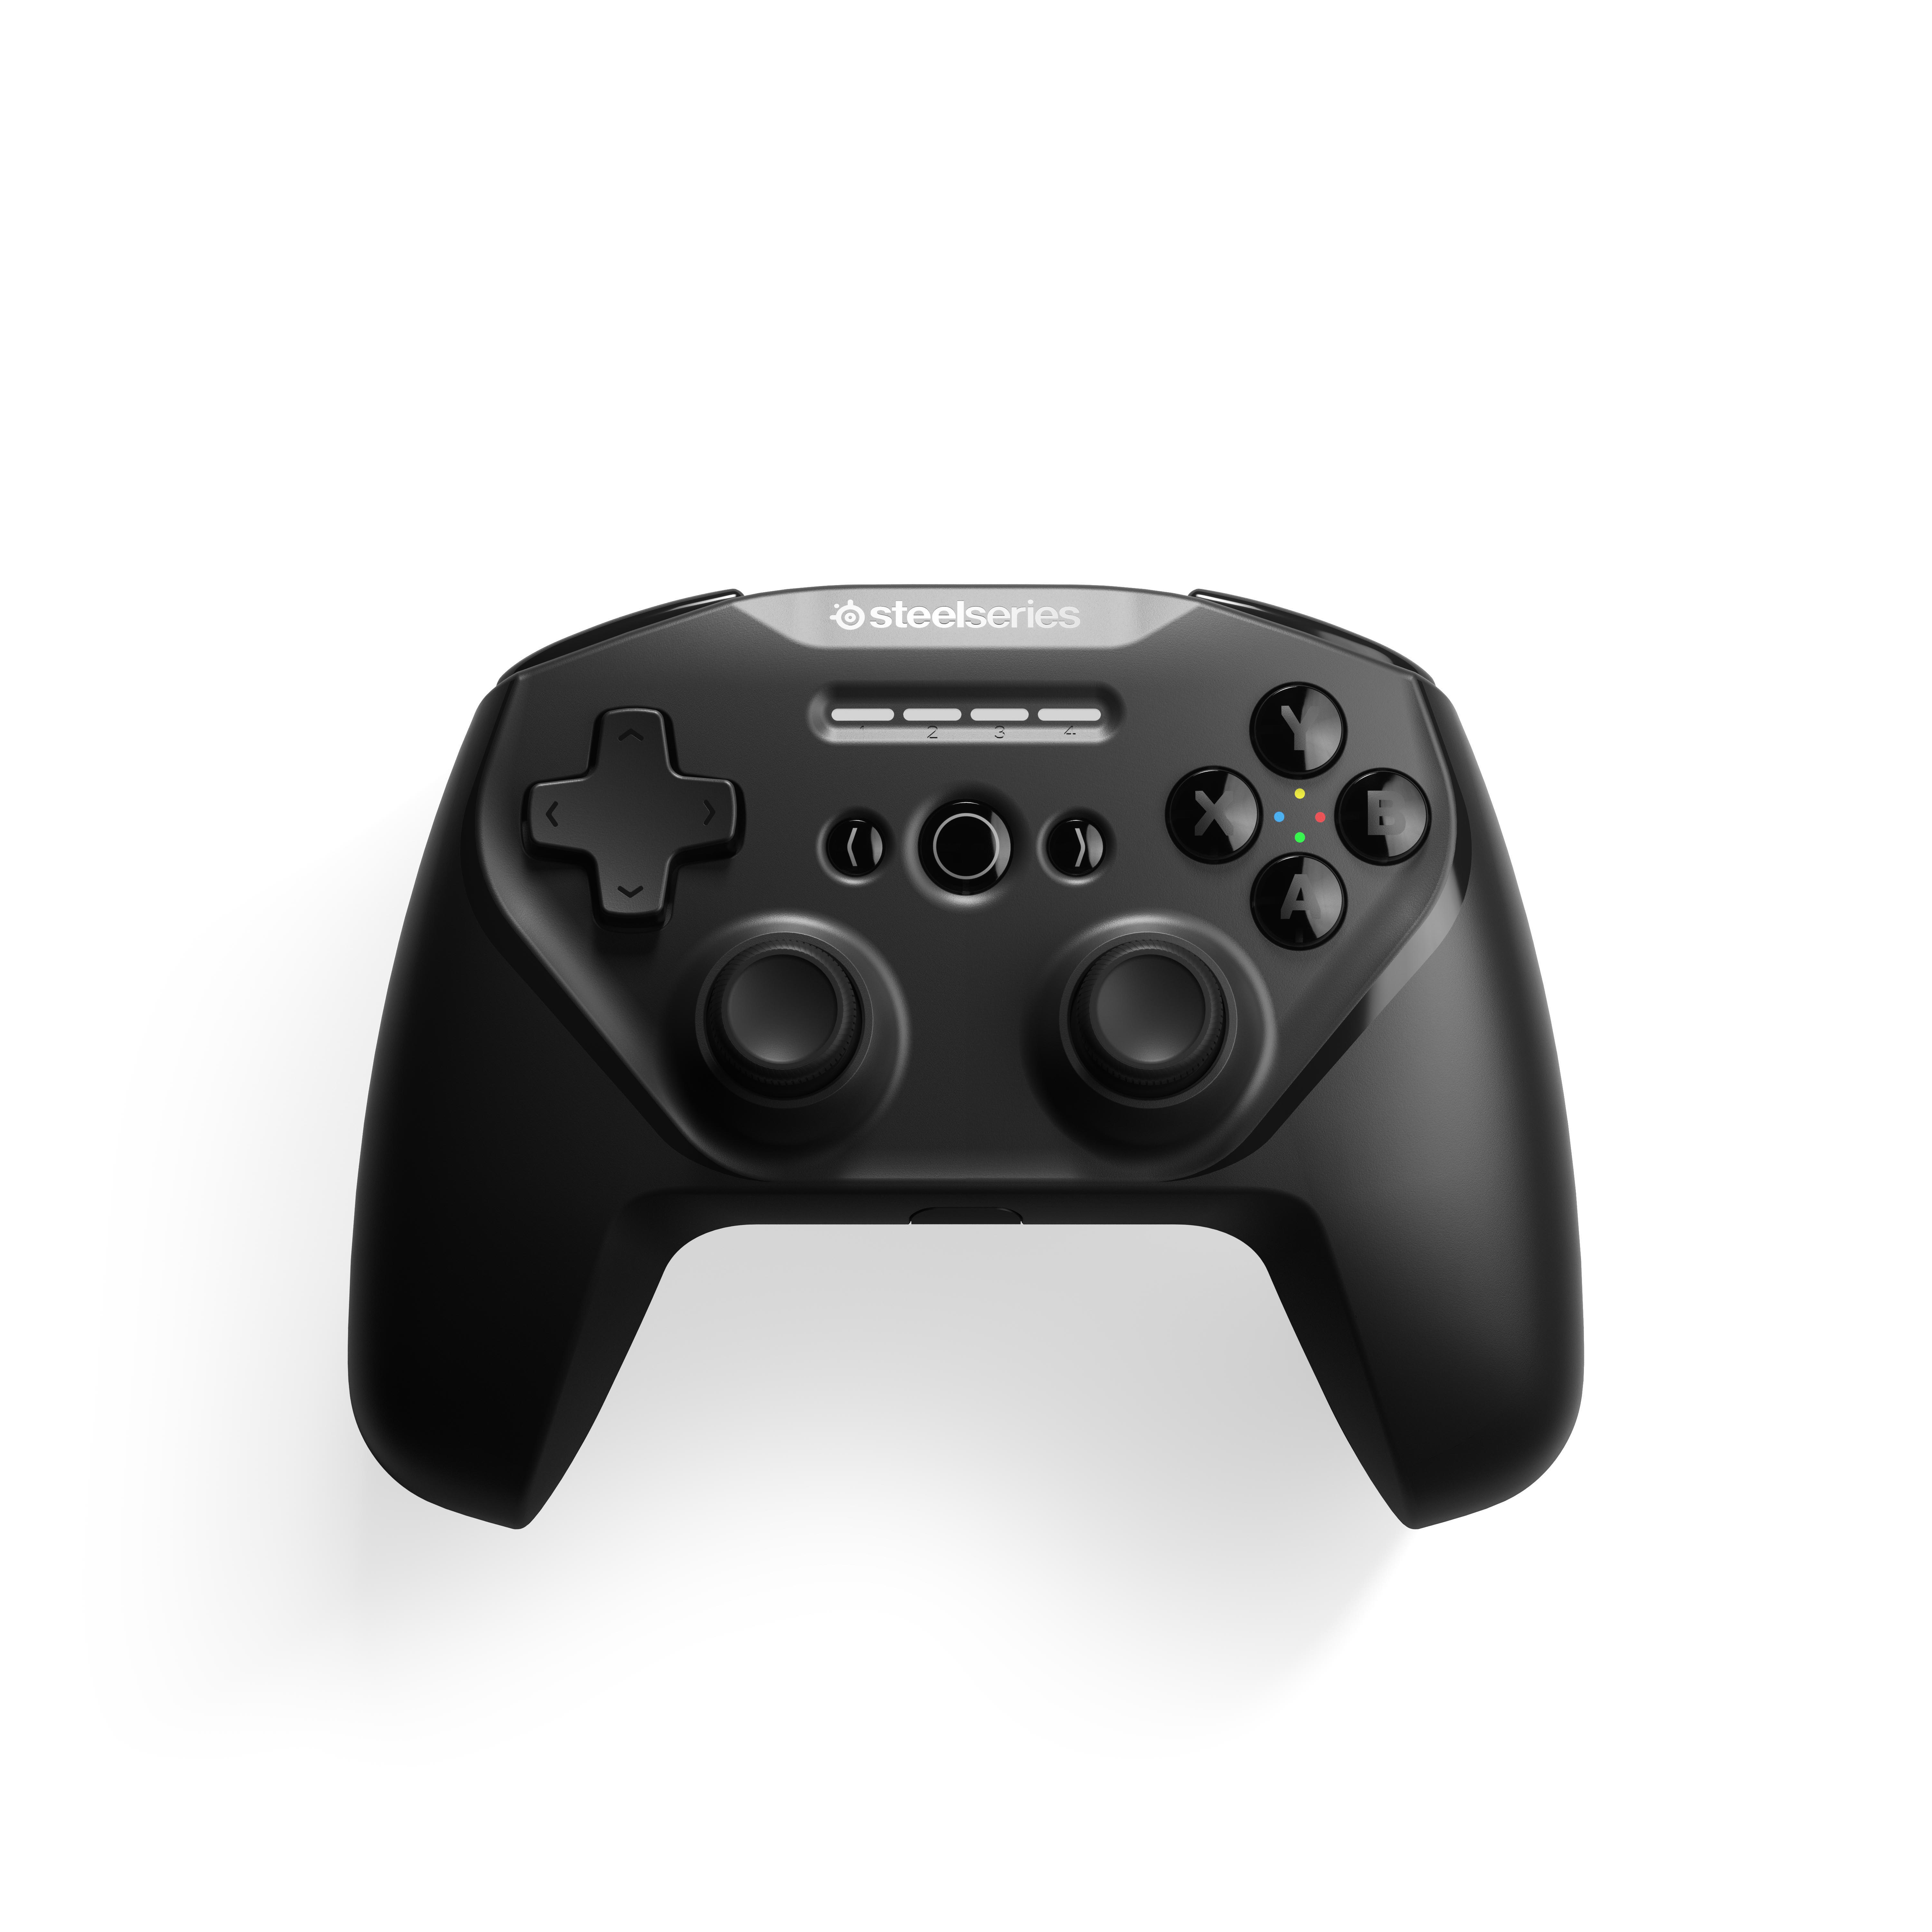 Schwarz für Gaming STEELSERIES STRATUS DUO PC, Controller Android, Other